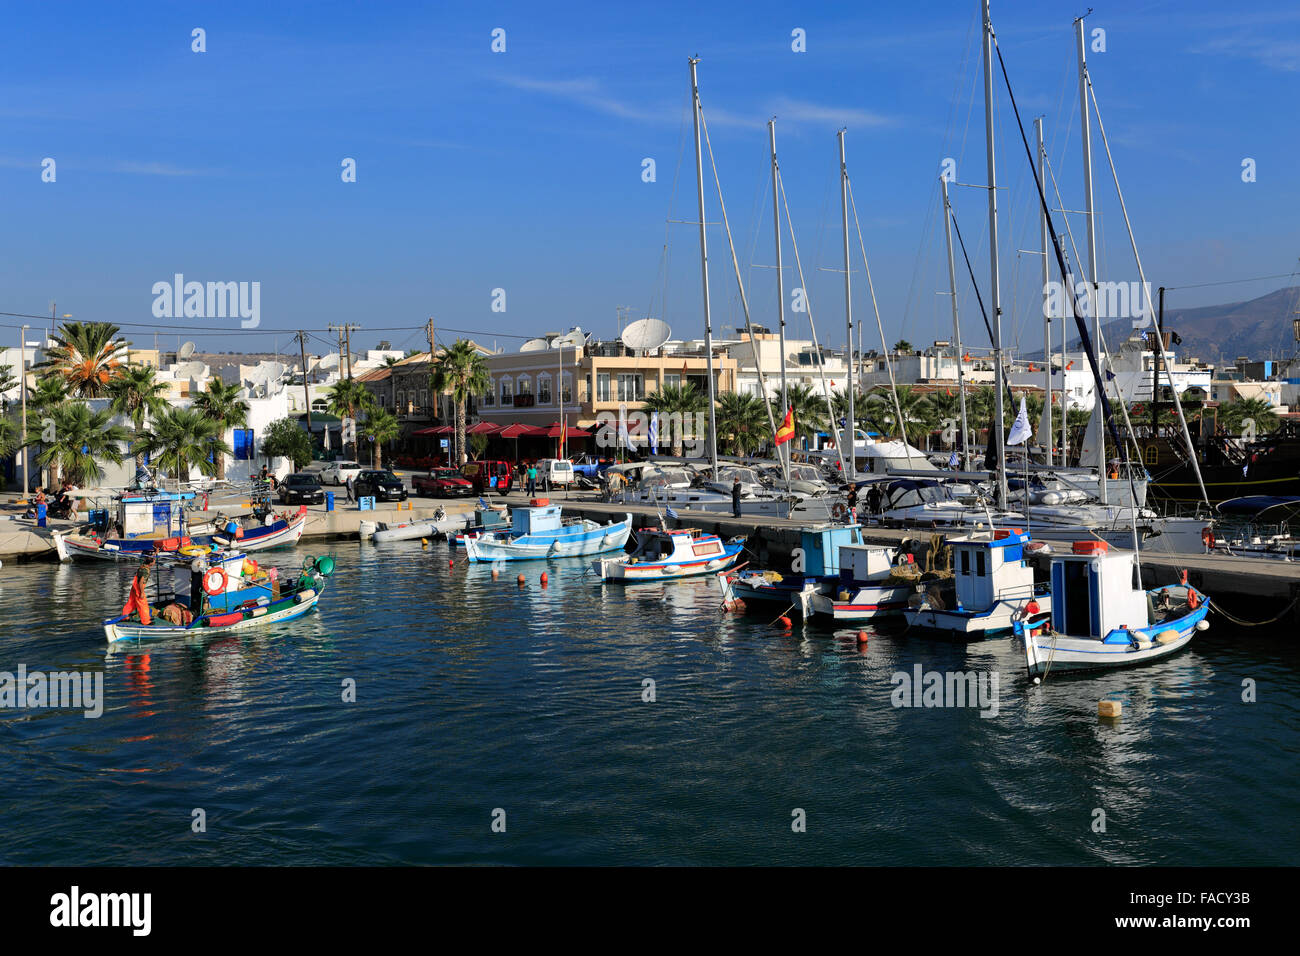 Sailing and fishing boats in Kardamena village harbour, Kos Island, Dodecanese group of islands, South Aegean Sea, Greece. Stock Photo